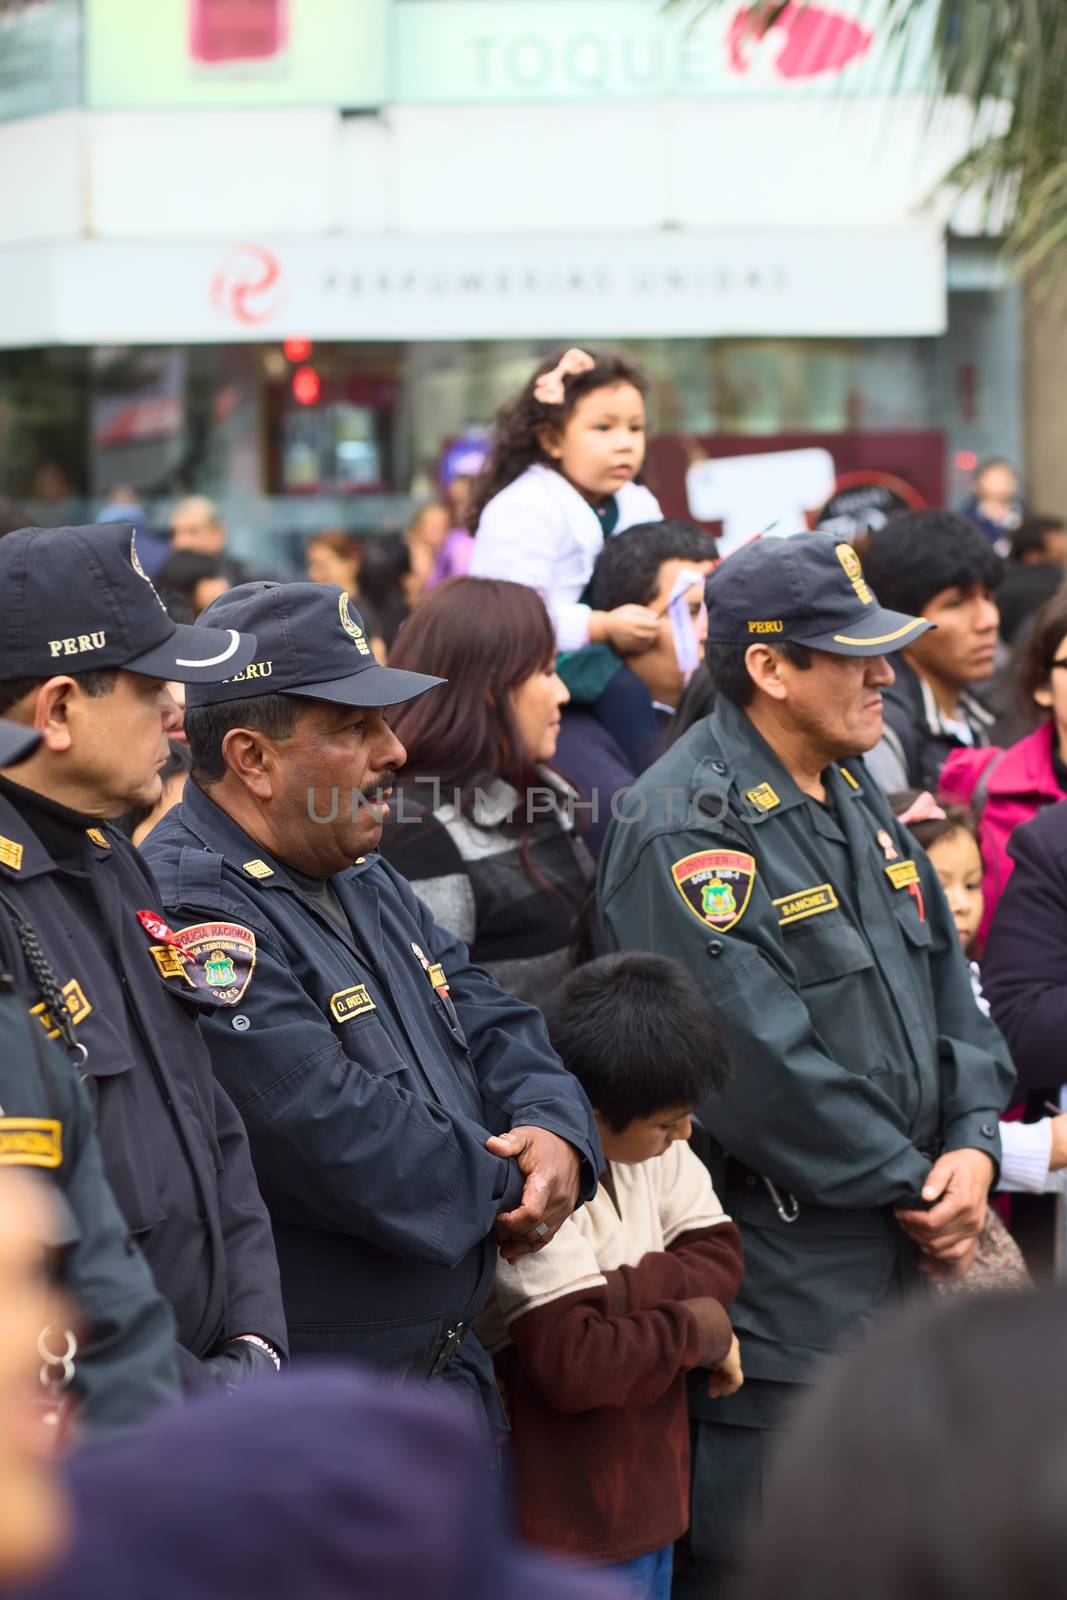 LIMA, PERU - JULY 21, 2013: Unidentified policemen on the Wong Parade in Miraflores on July 21, 2013 in Lima, Peru. The Parade (Gran Corso de Wong) is a traditional parade to celebrate the Peruvian national holiday which is on July 28-29.